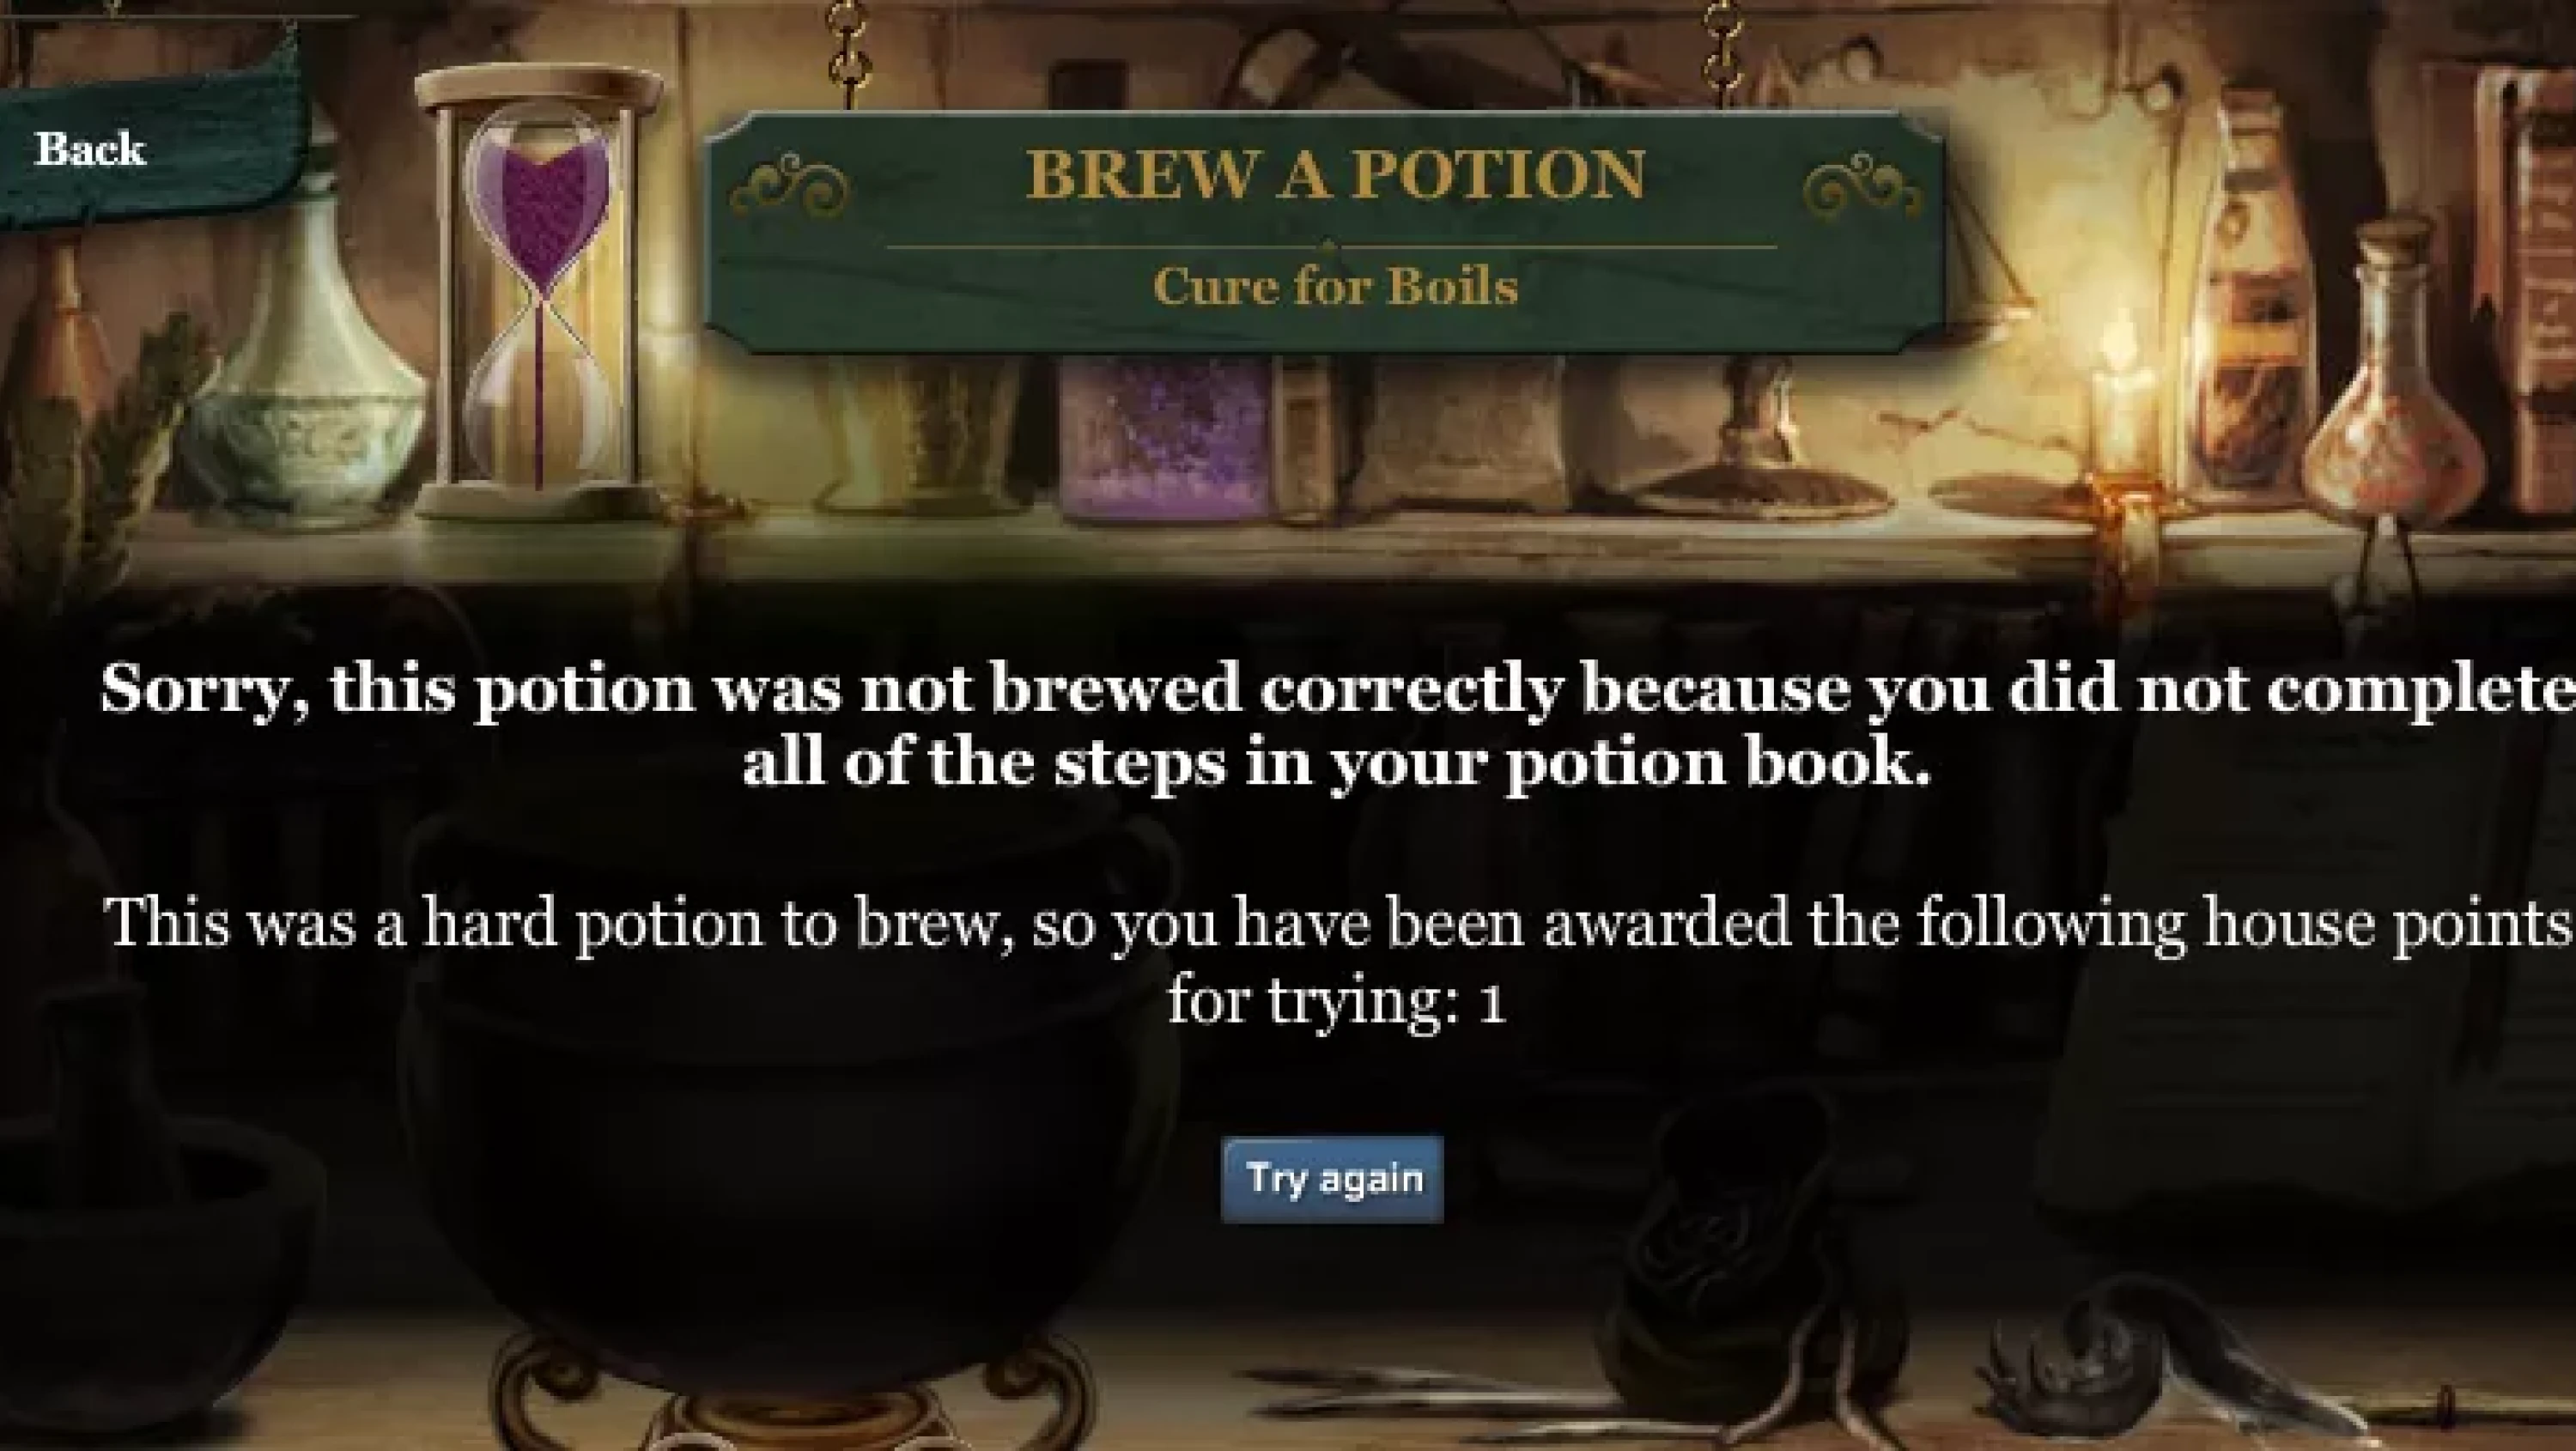 This was a hard potion to brew,  so you have been awarded the following house points for trying: 1